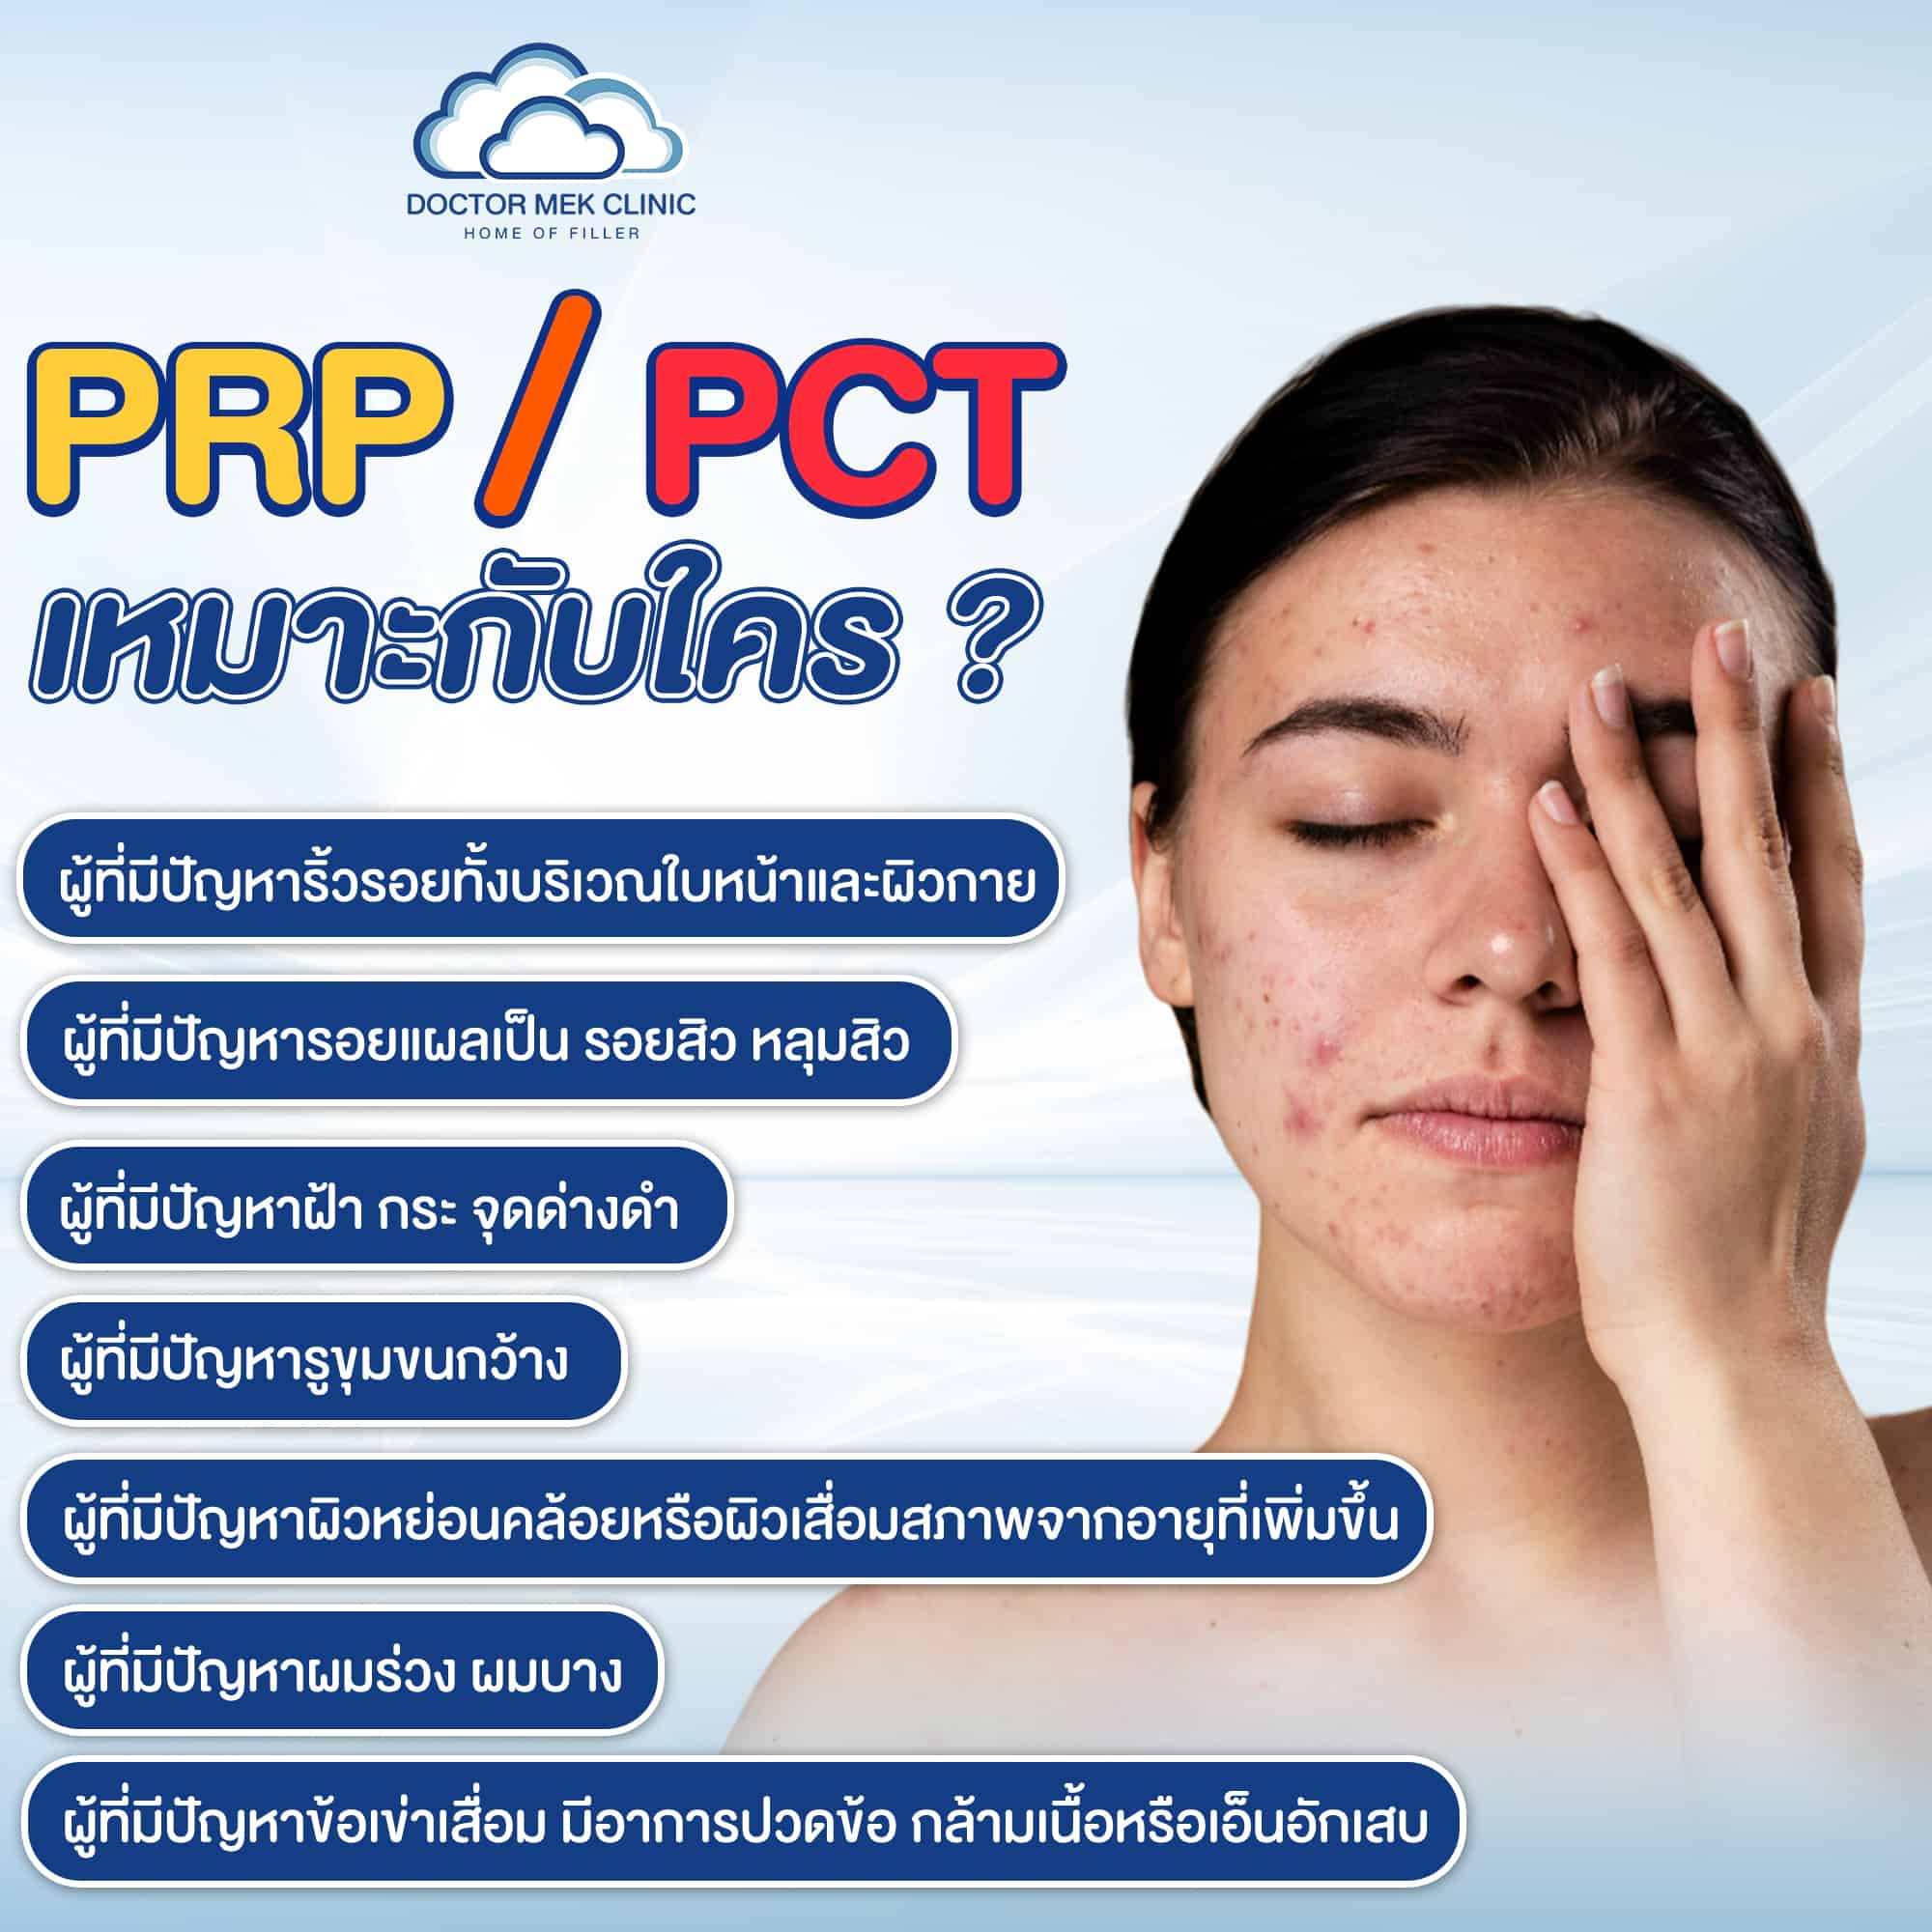 PRP PCT Personalized Cell Therapy เหมาะสำหรับใคร